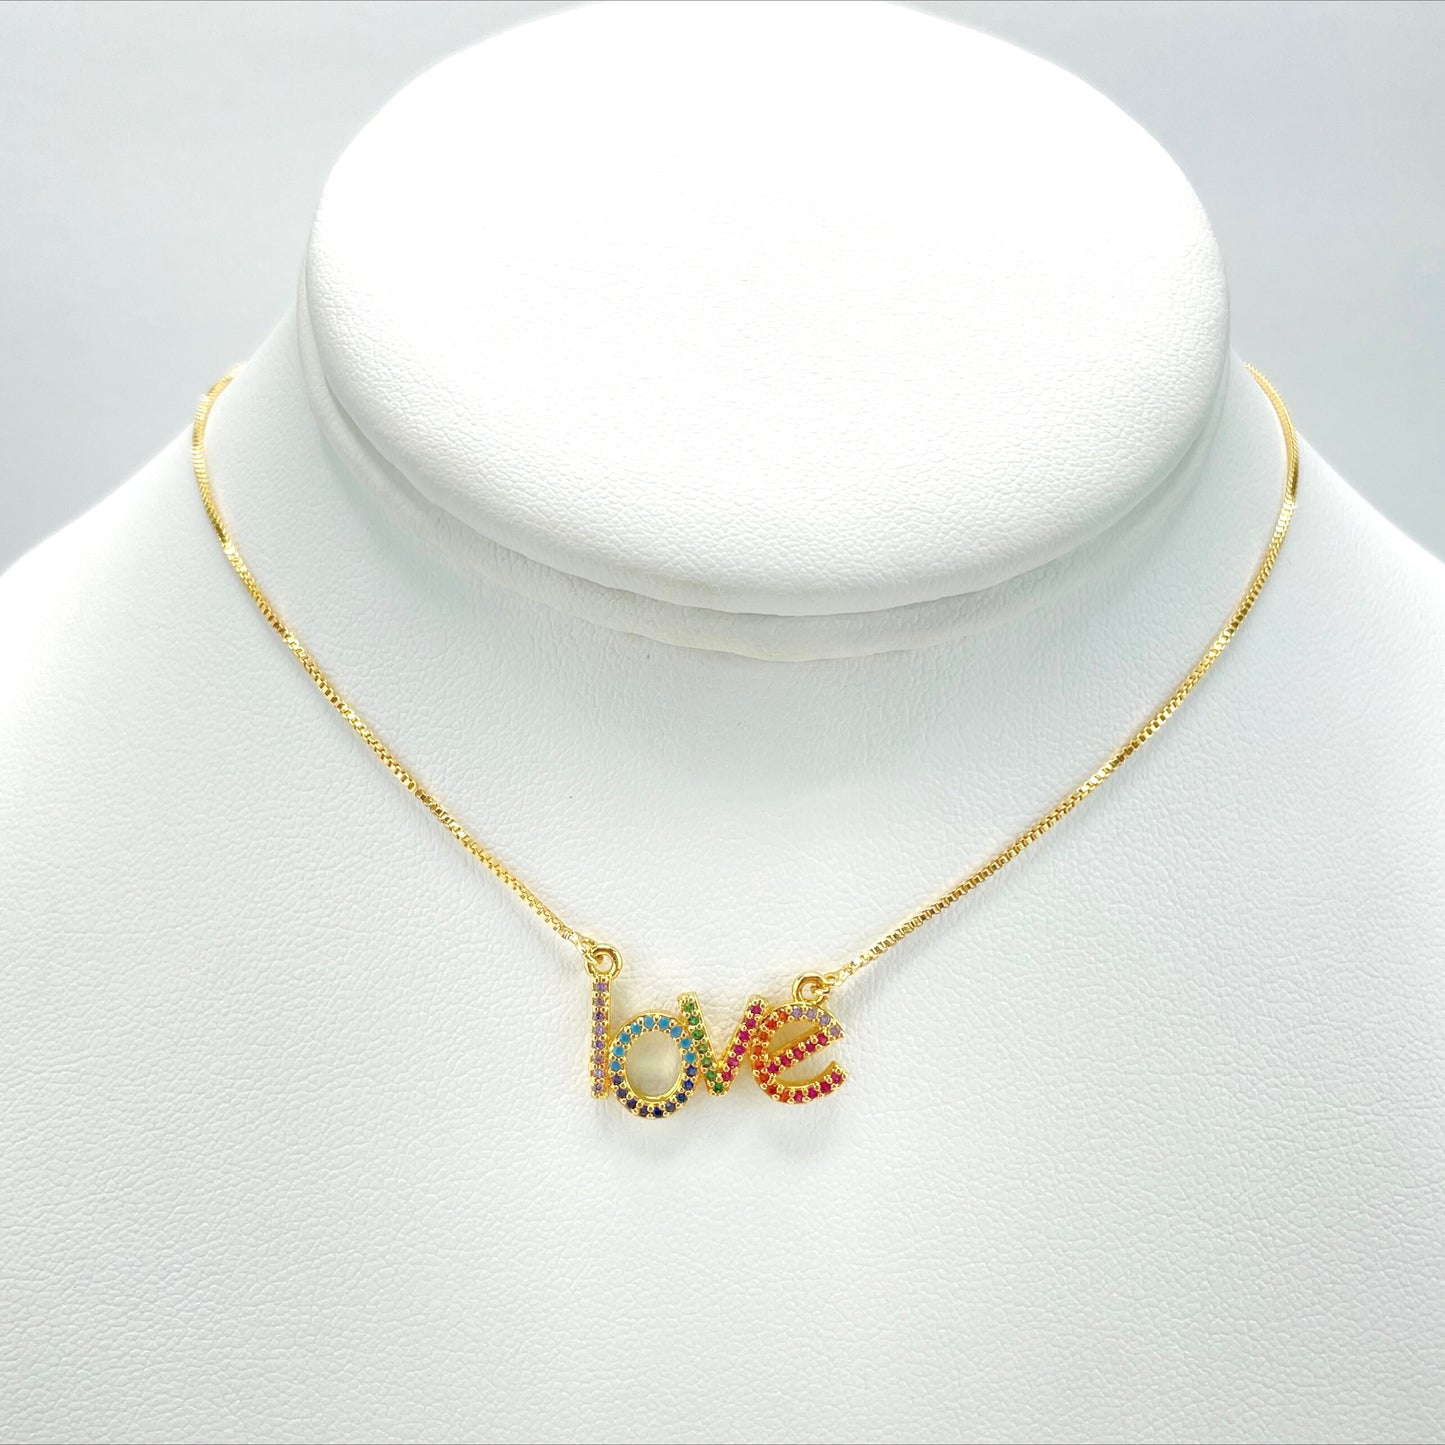 18k Gold Filled 1mm Box Chain Necklace with Colored Micro Cubic Zirconia "LOVE"  Word Letters, Wholesale Jewelry Making Supplies